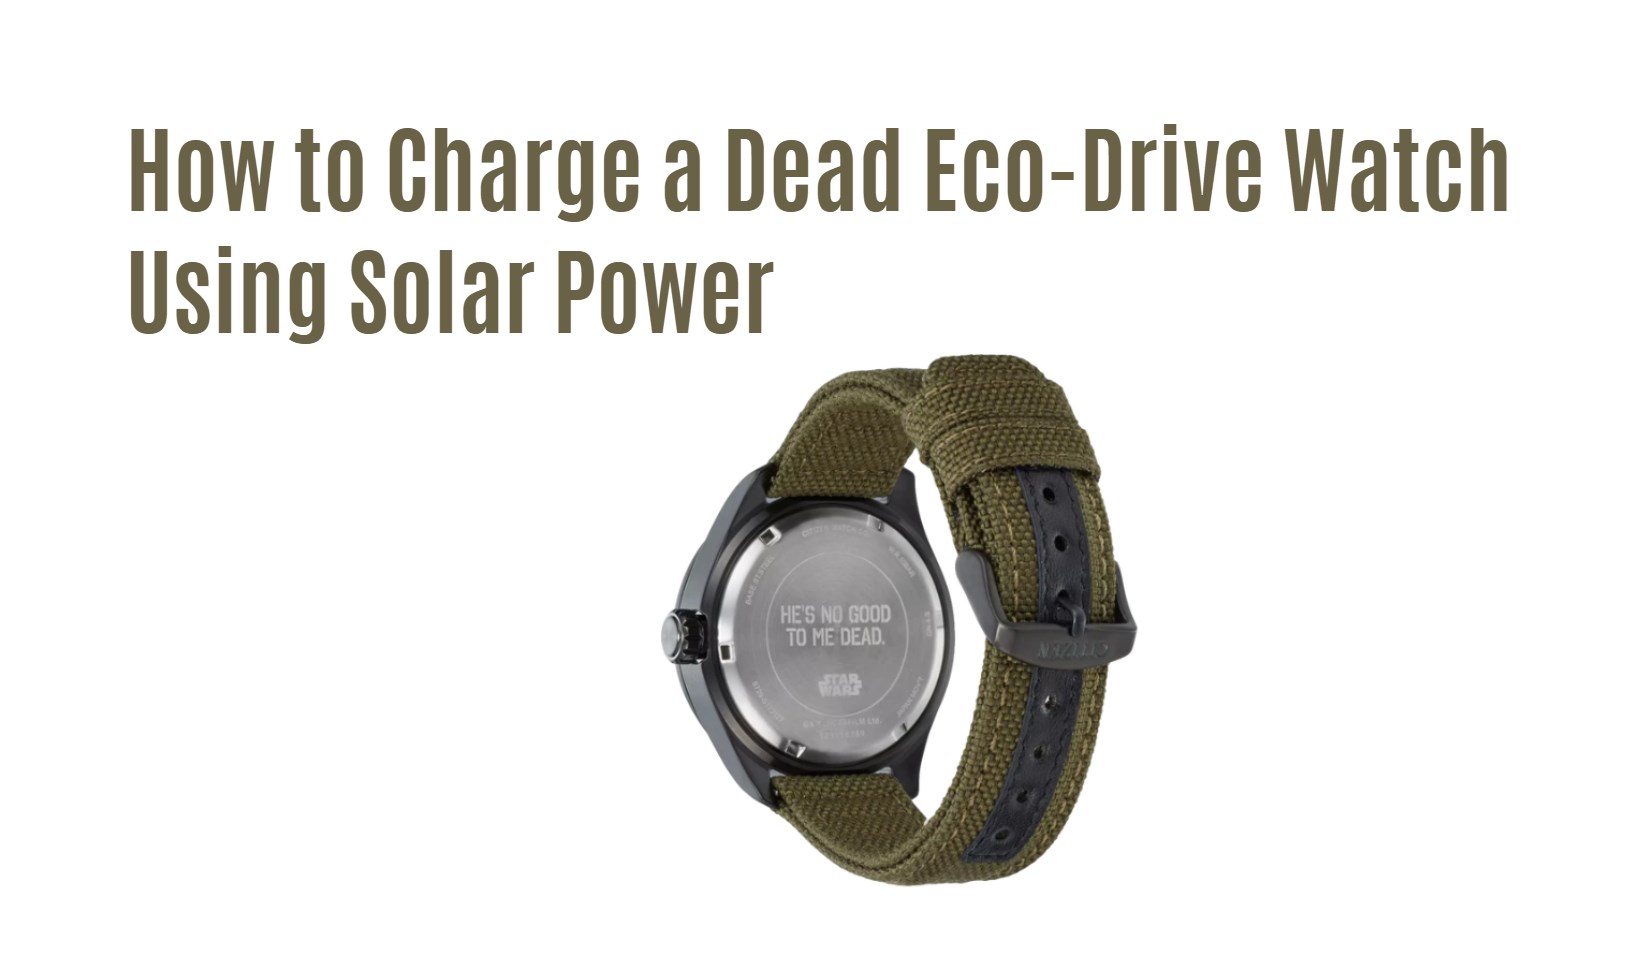 How to Charge a Dead Eco-Drive Watch Using Solar Power